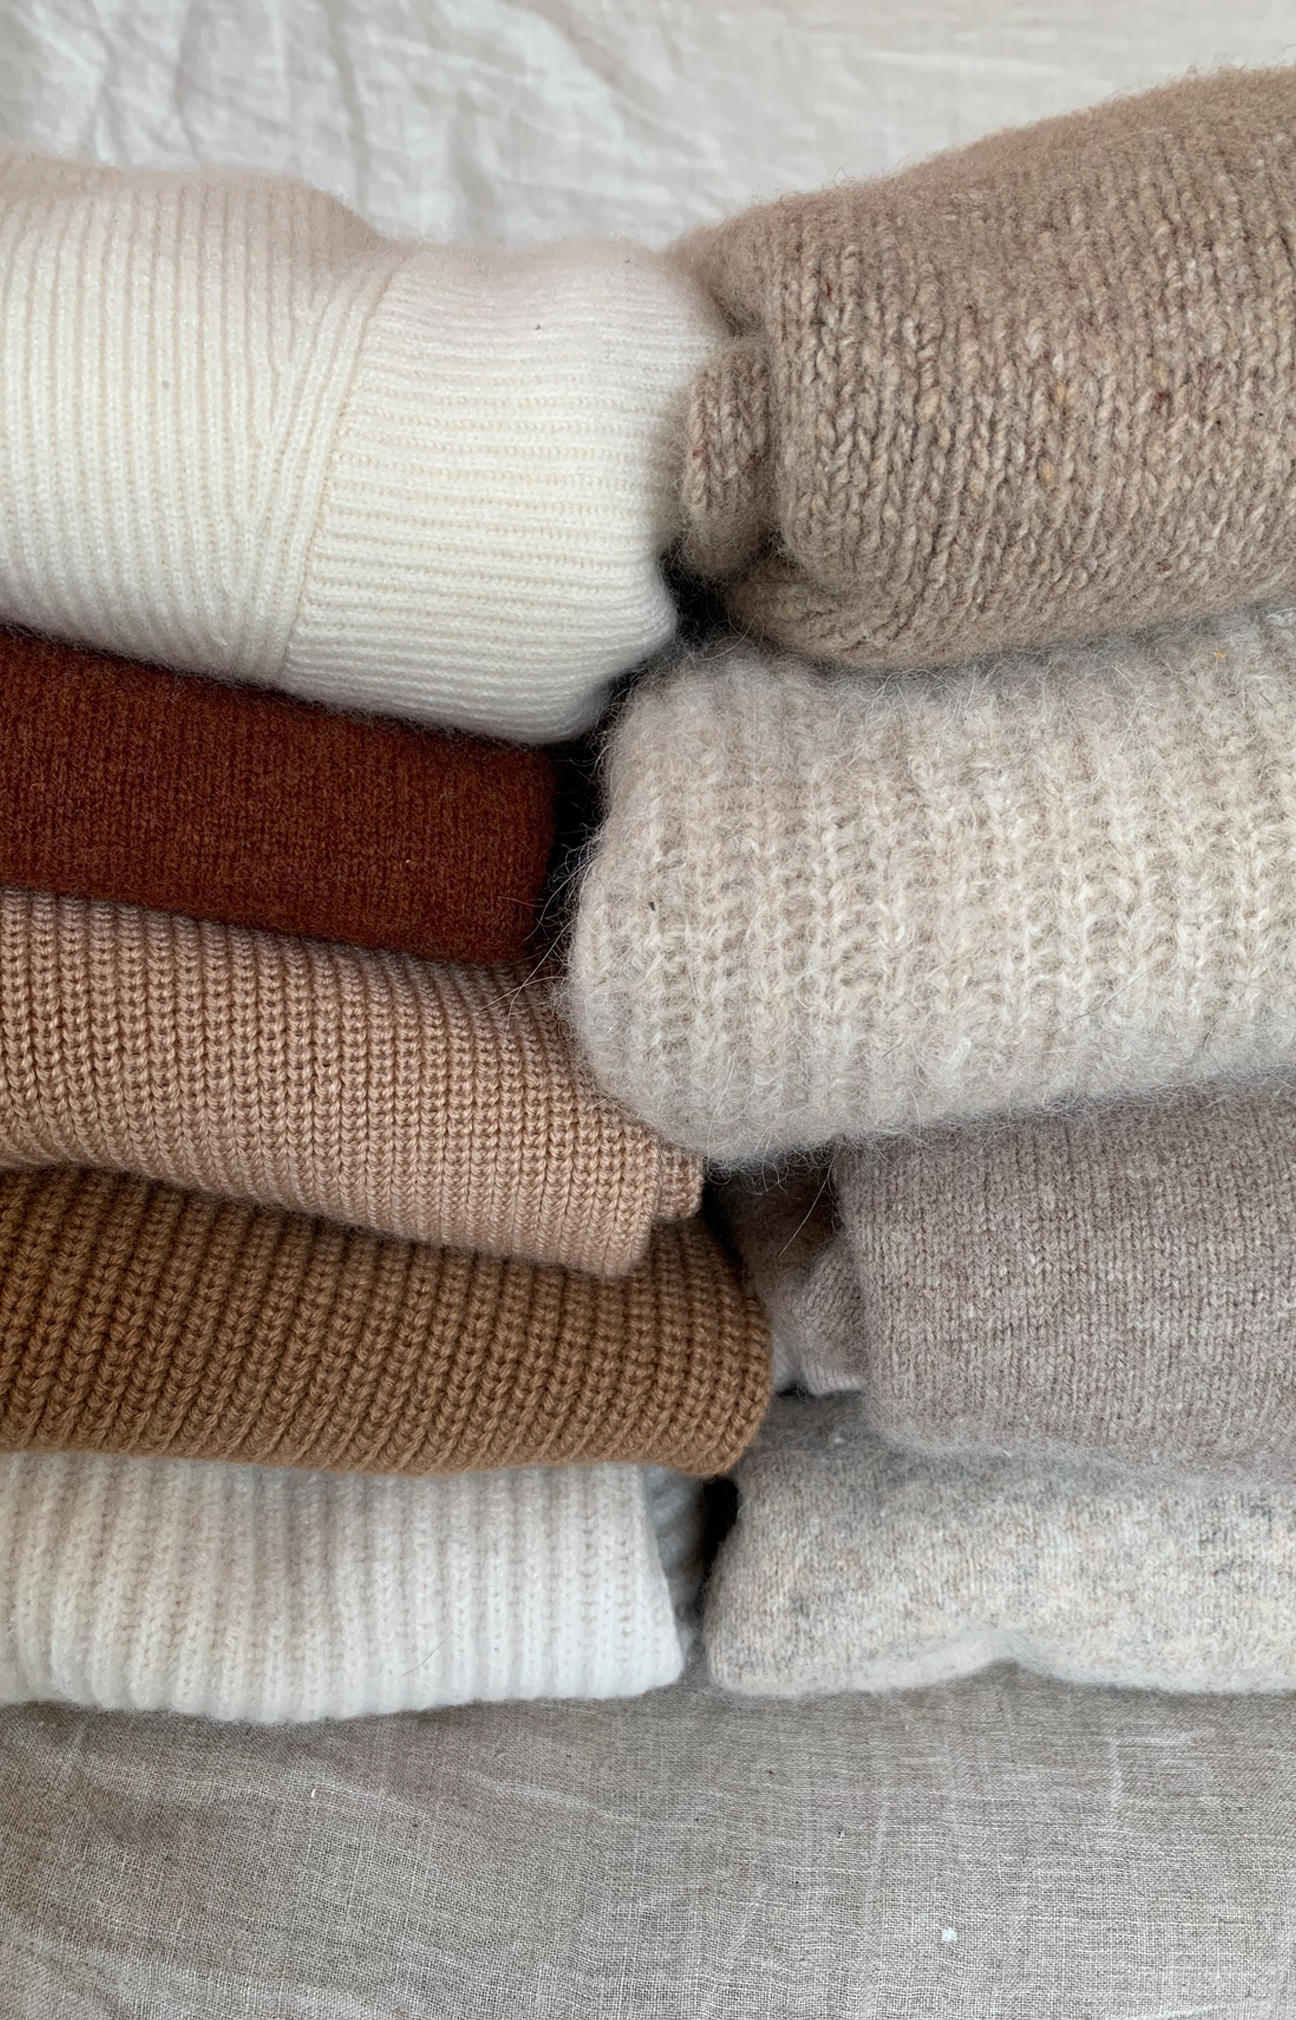 DE SMET | Sustain Your Wardrobe: How to Wash Wool Sweaters